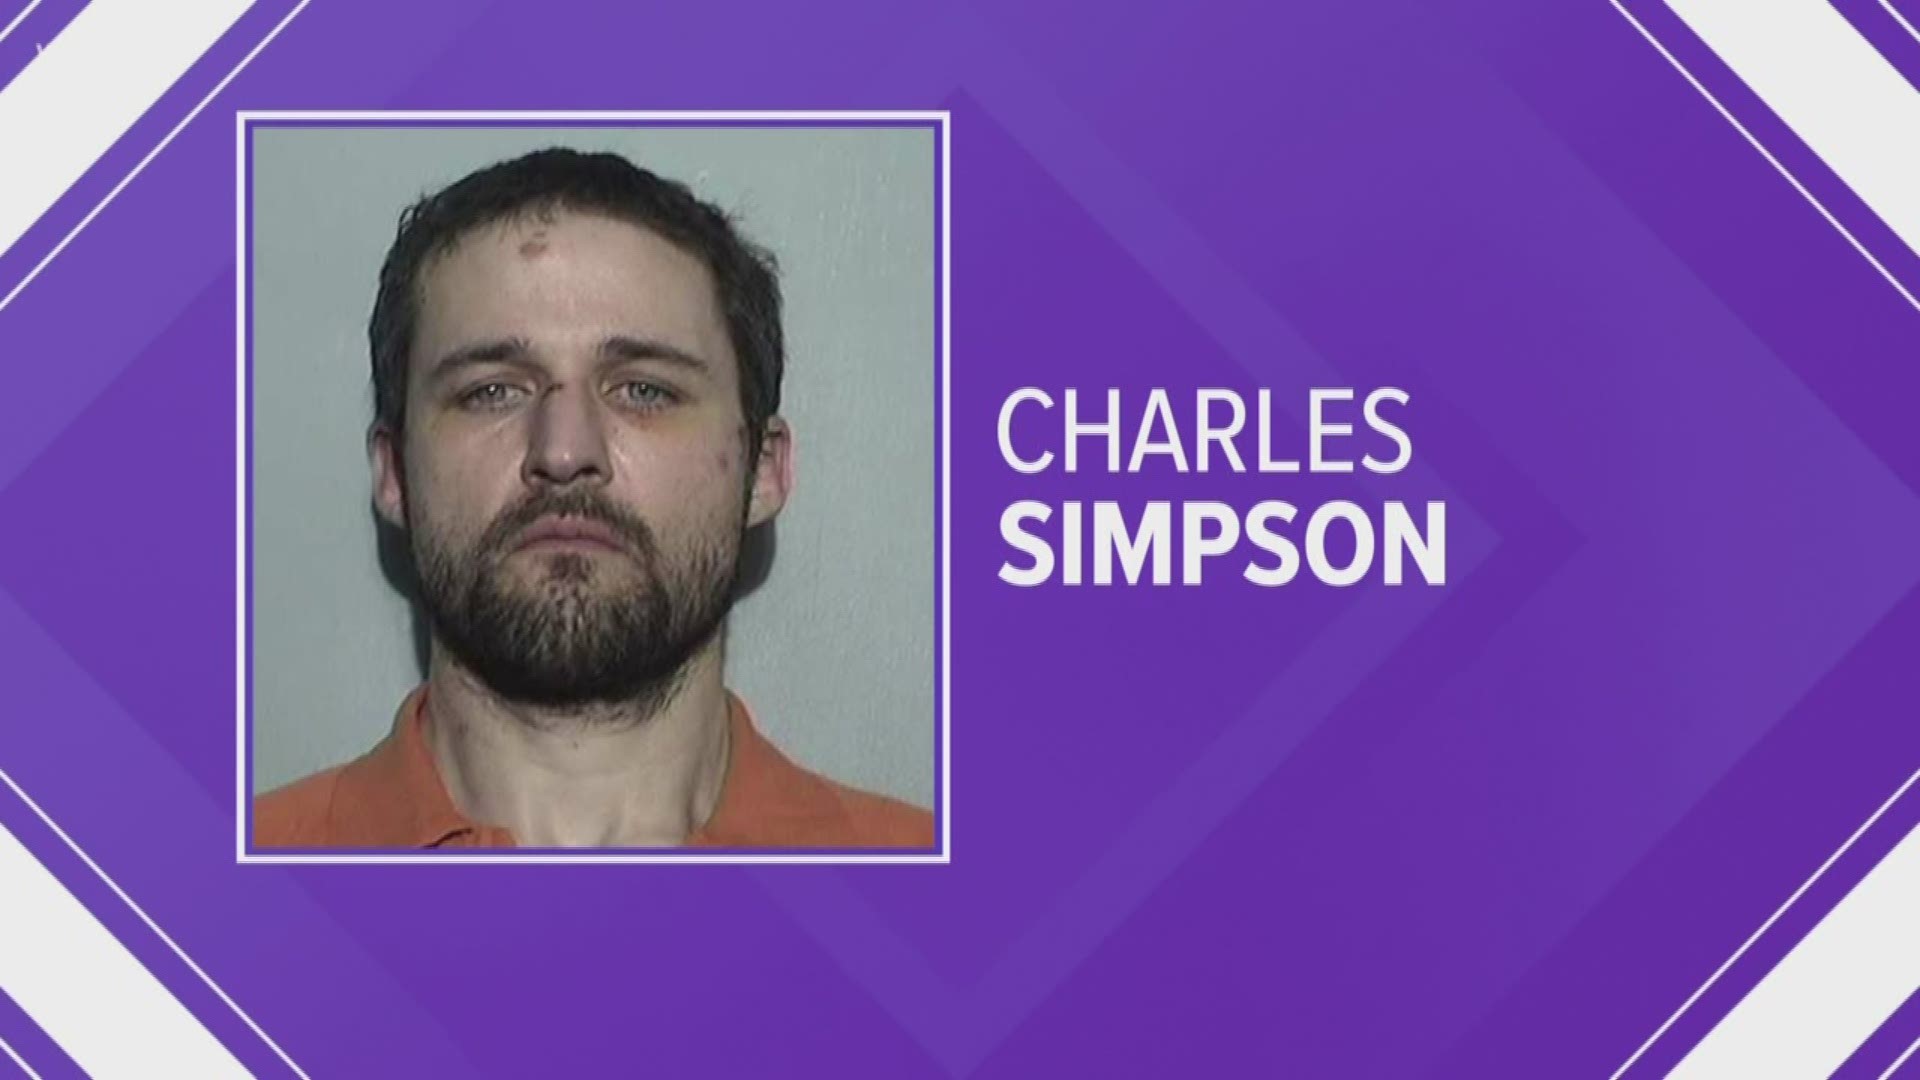 Charles Simpson beat his mother in January. She died of her injuries months later.